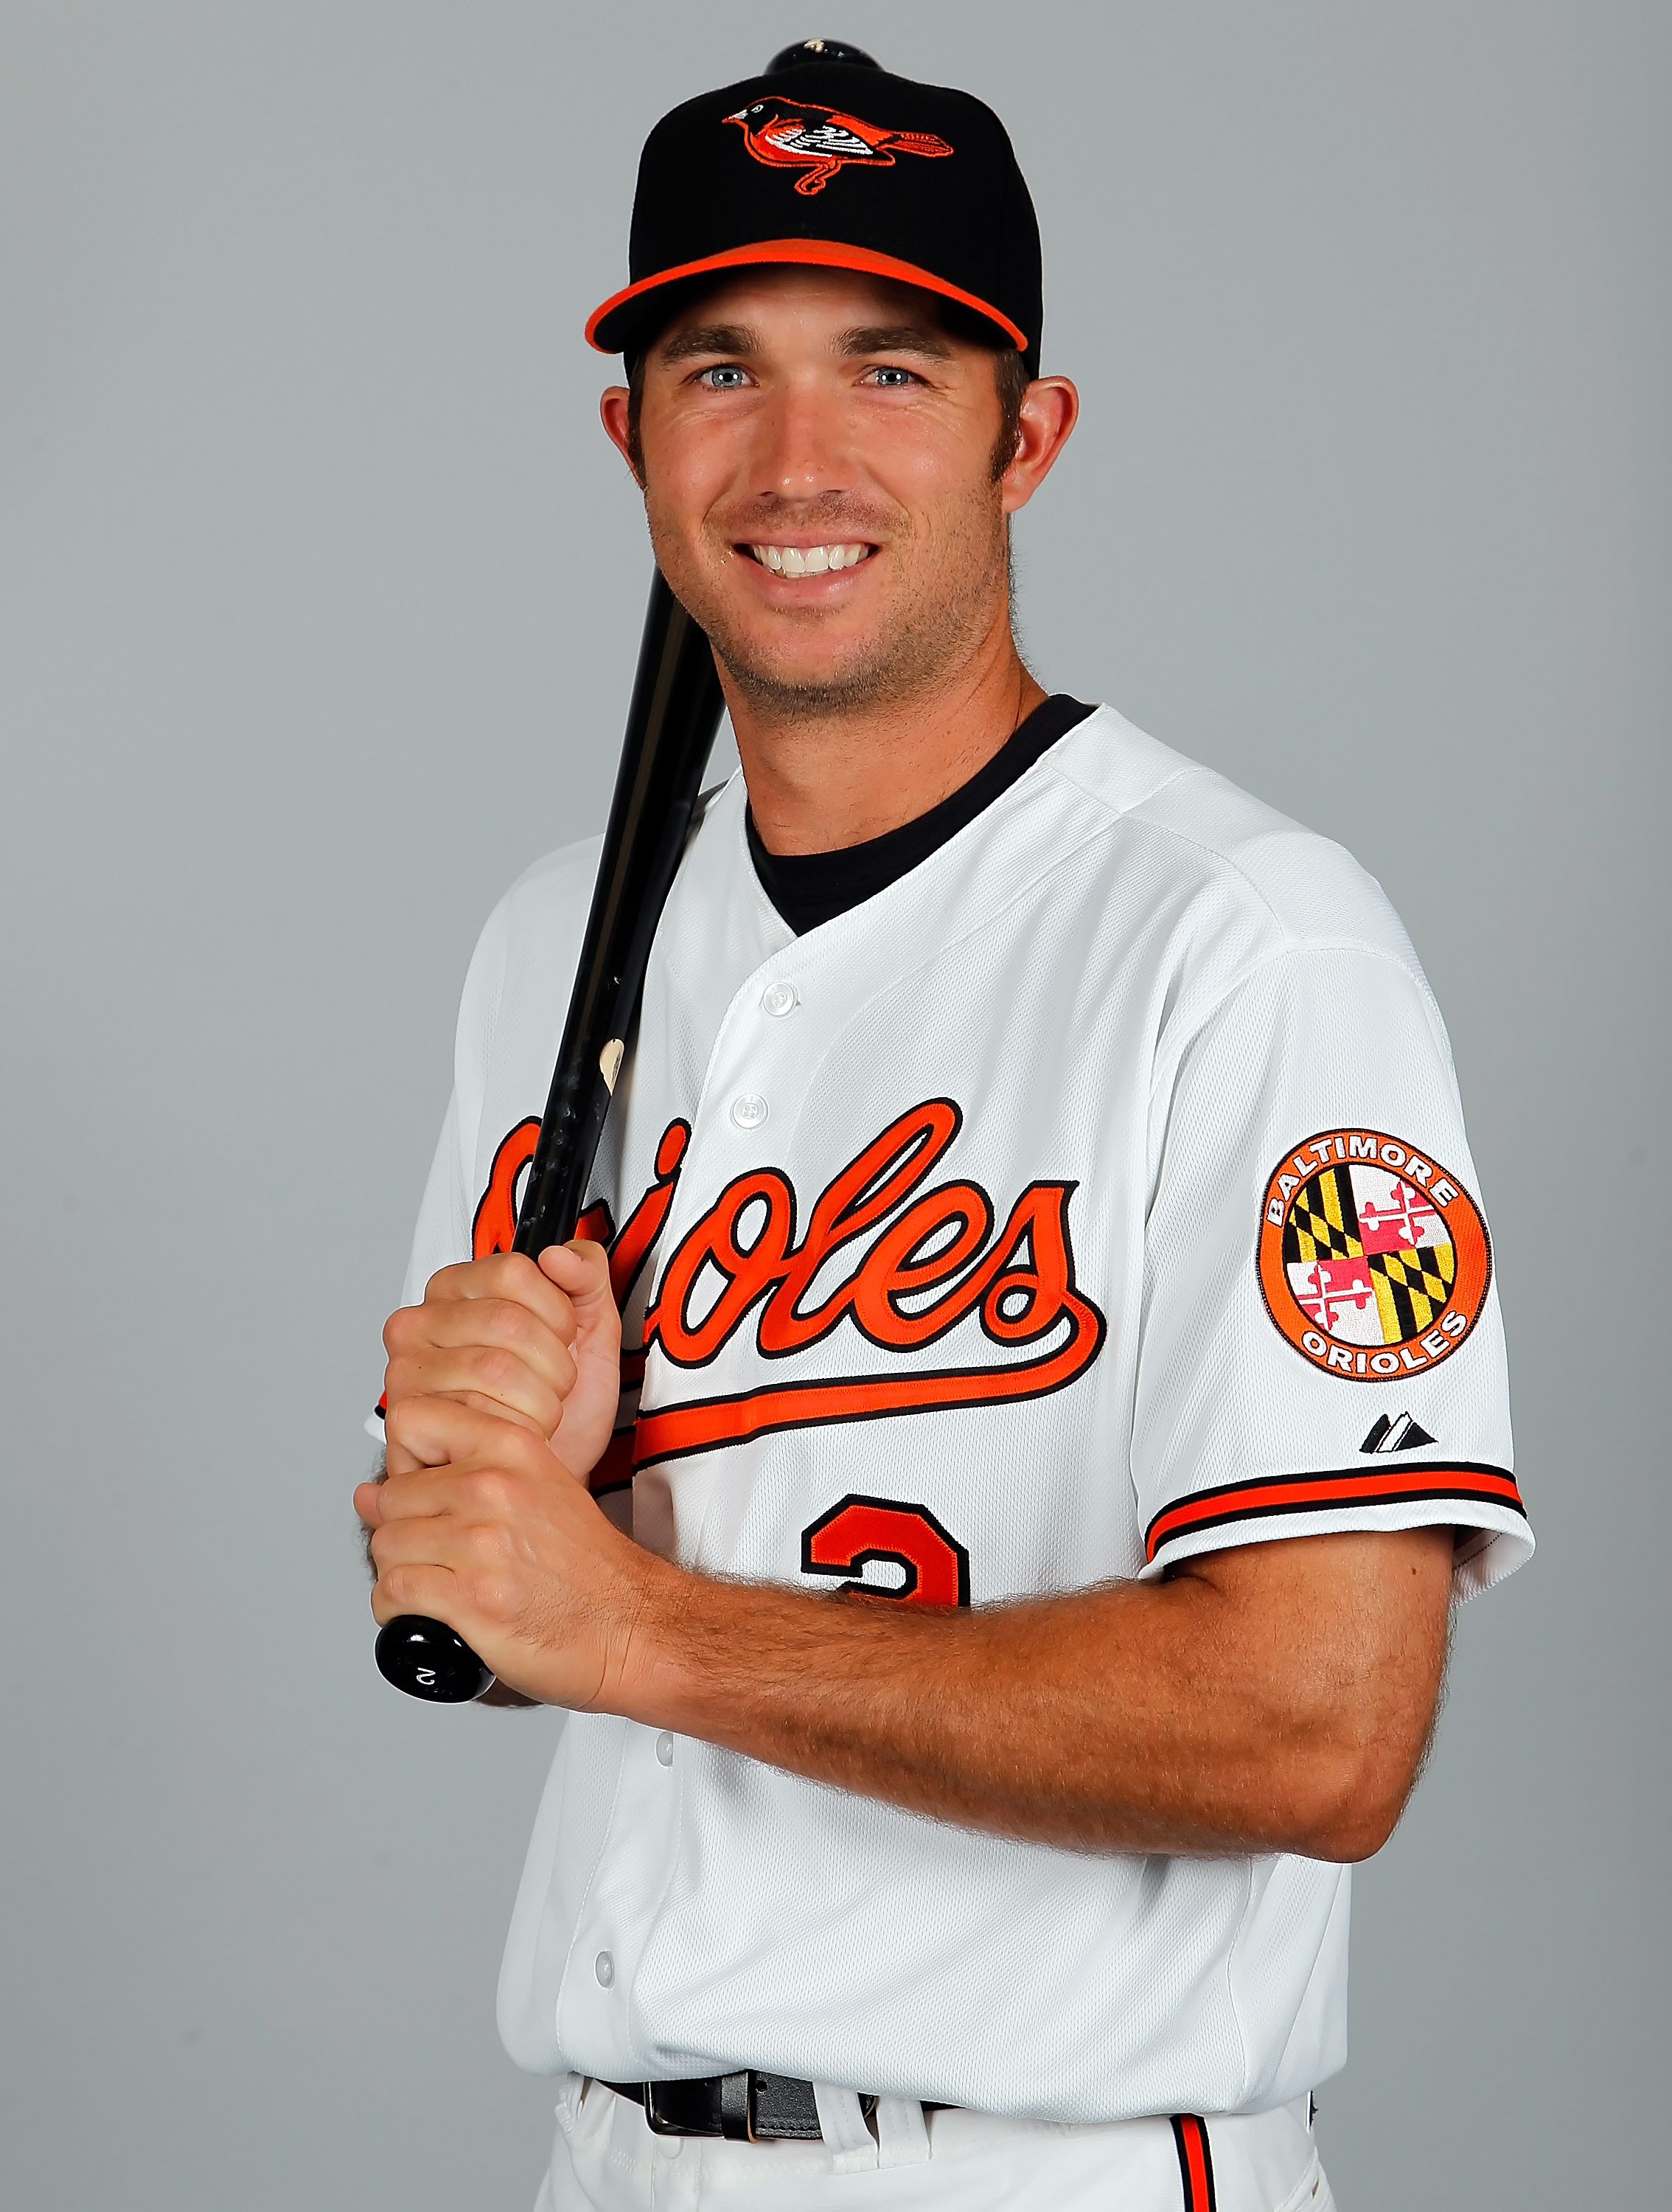 SARASOTA, FL - FEBRUARY 26:  Infielder J.J. Hardy #2 of the Baltimore Orioles poses for a photo during photo day at Ed Smith Stadium on February 26, 2011 in Sarasota, Florida.  (Photo by J. Meric/Getty Images)